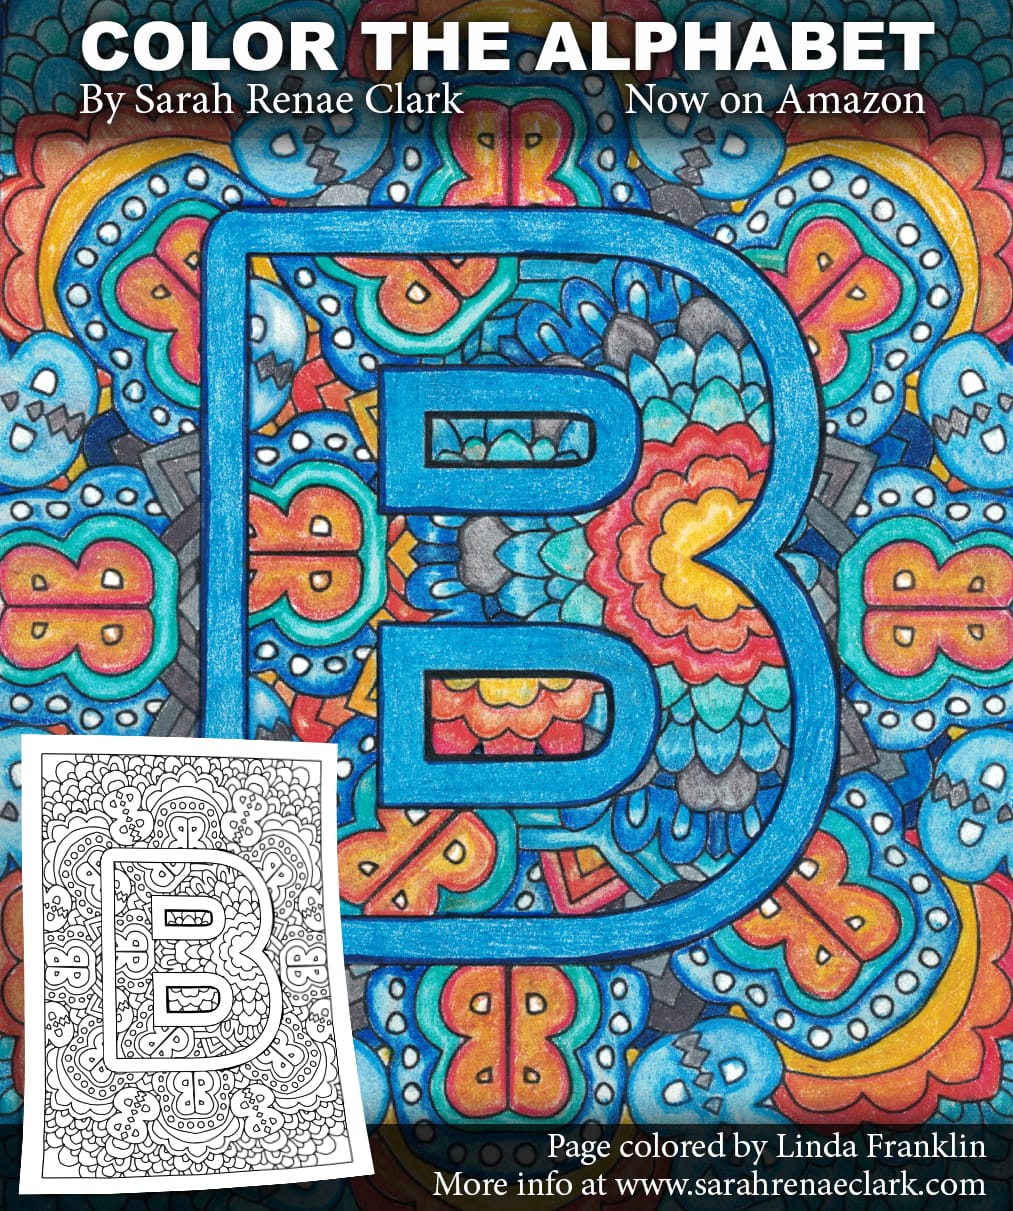 color-the-alphabet-printable-adult-coloring-book-sarah-renae-clark-coloring-book-artist-and